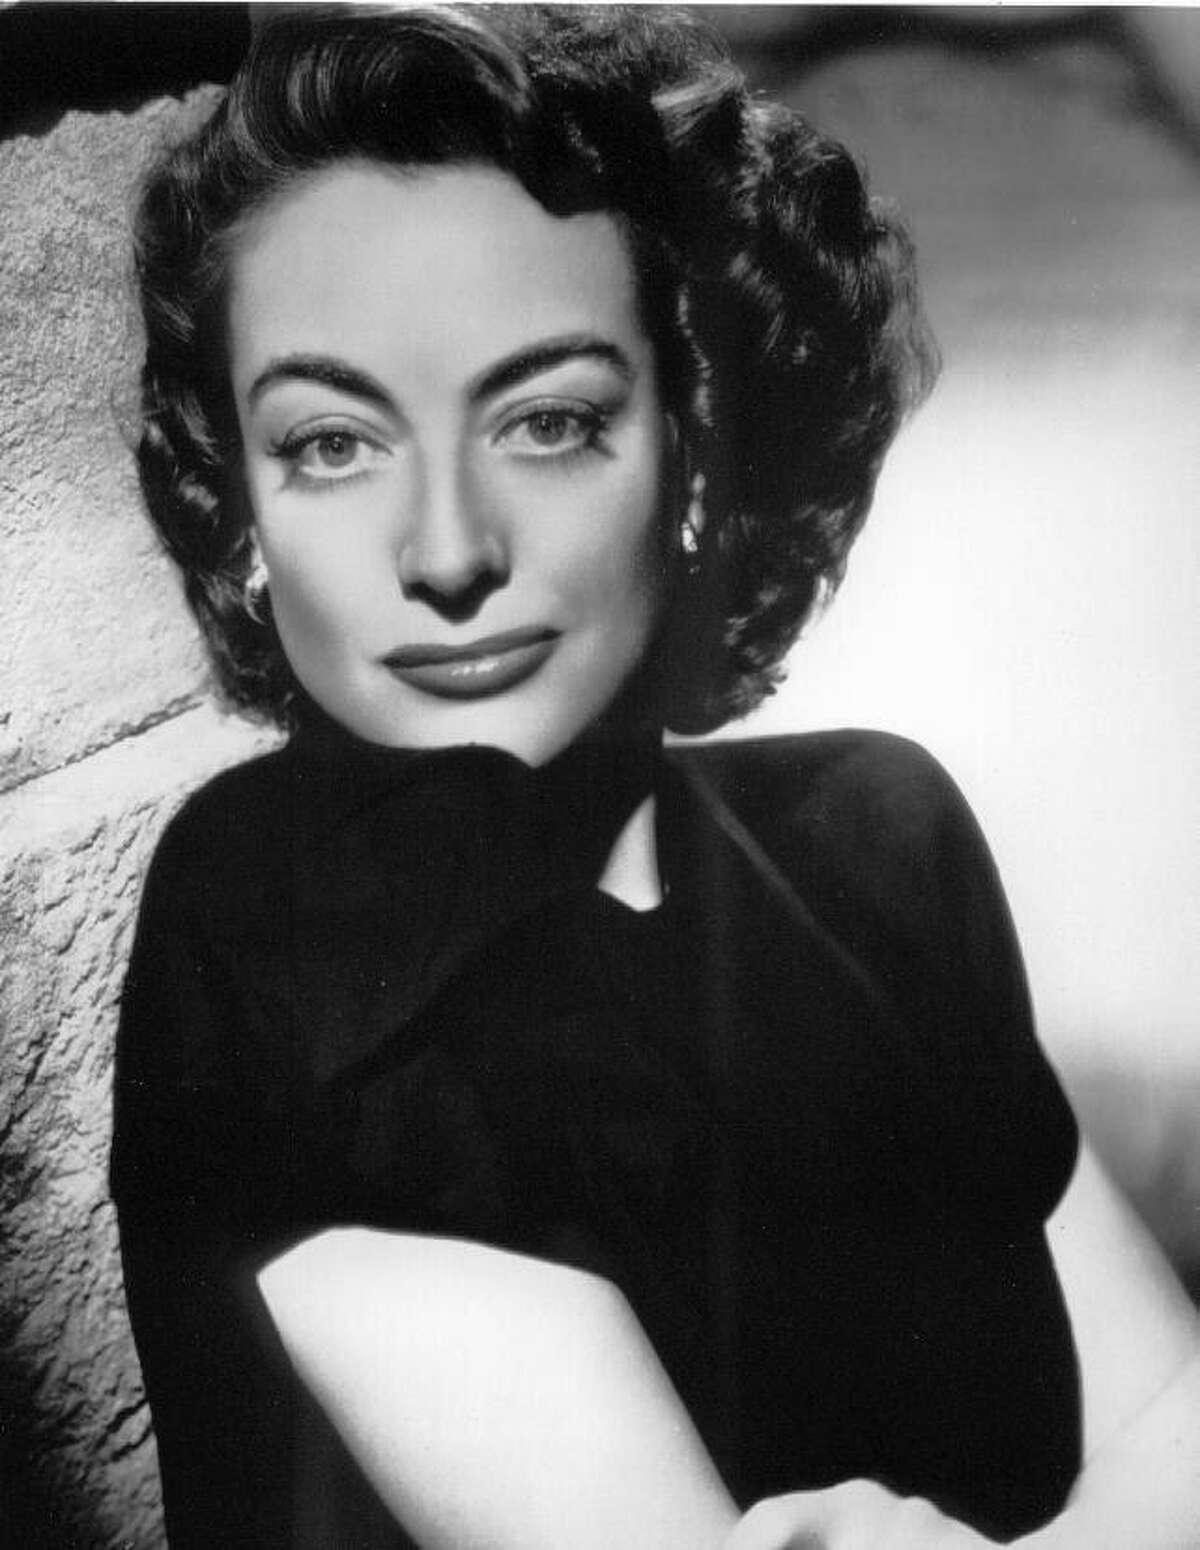 Joan Crawford is among the golden era of Hollywood actresses who inspired the new collection of lipsticks for Gucci Beauty.